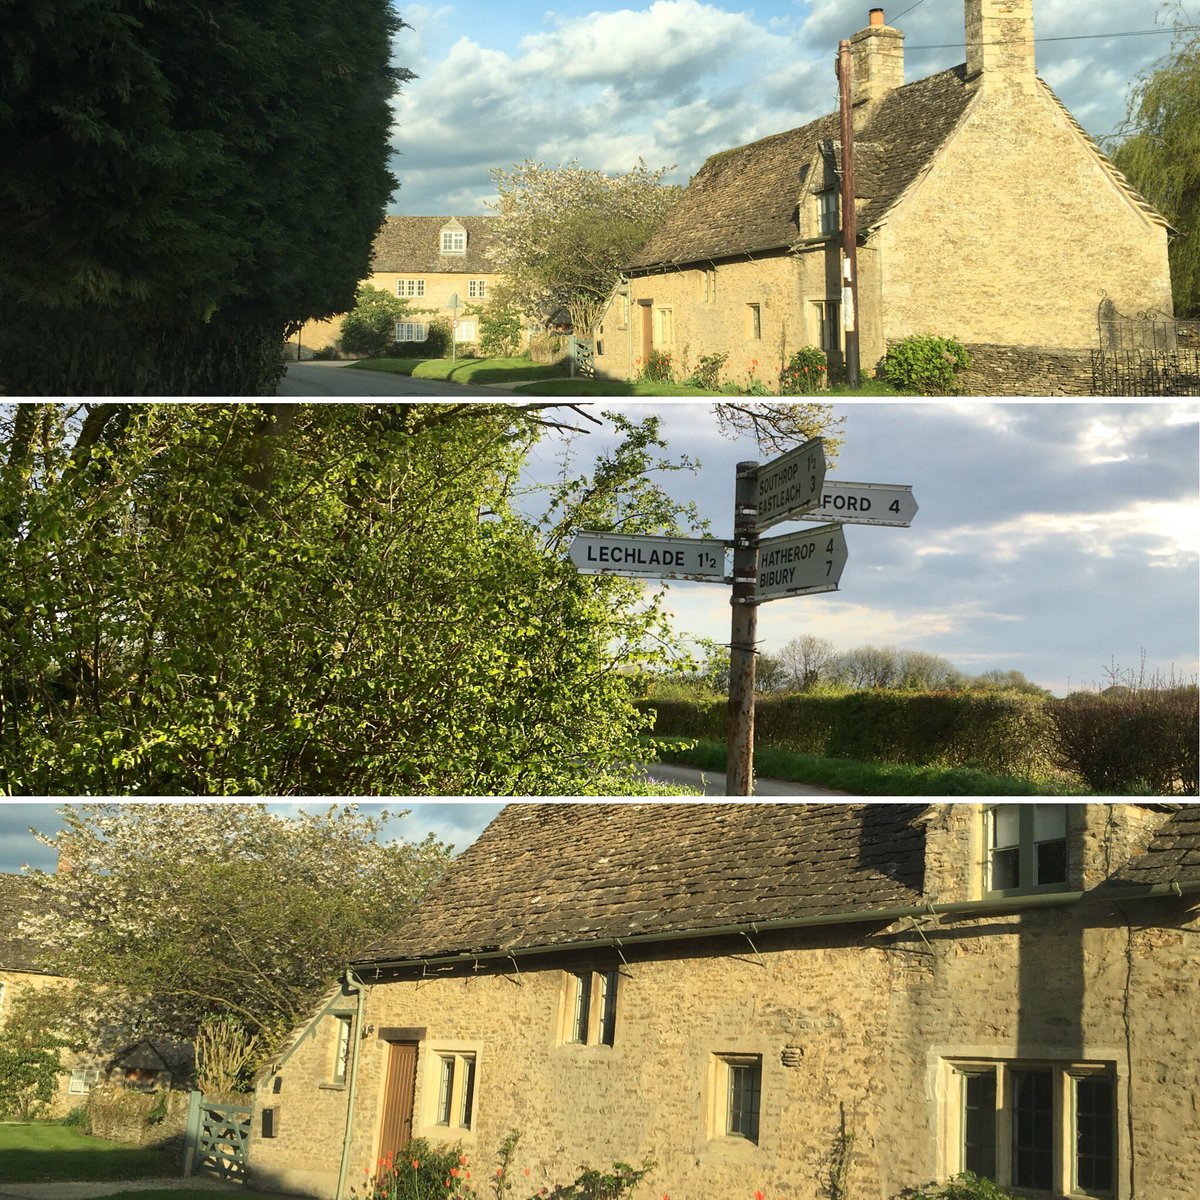 Evening light on Culls Cottage #holidaybliss #cotswolds #springshowers